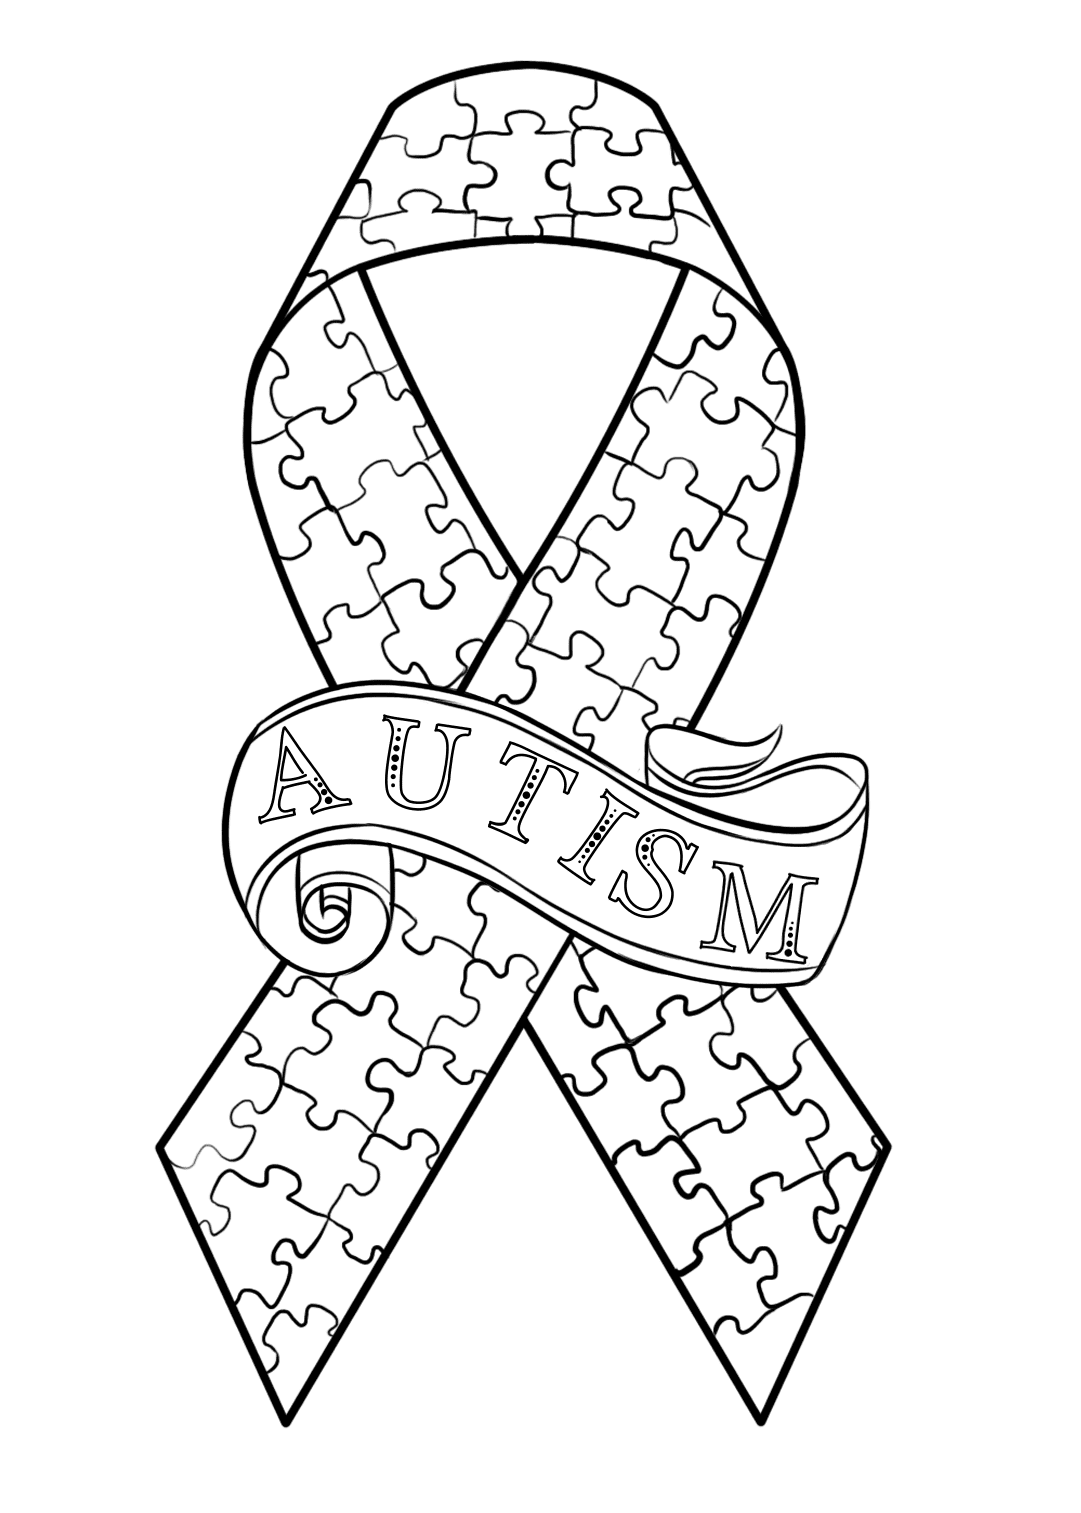 Printable Autism Awareness Ribbon Coloring Page Free Printable Coloring Pages